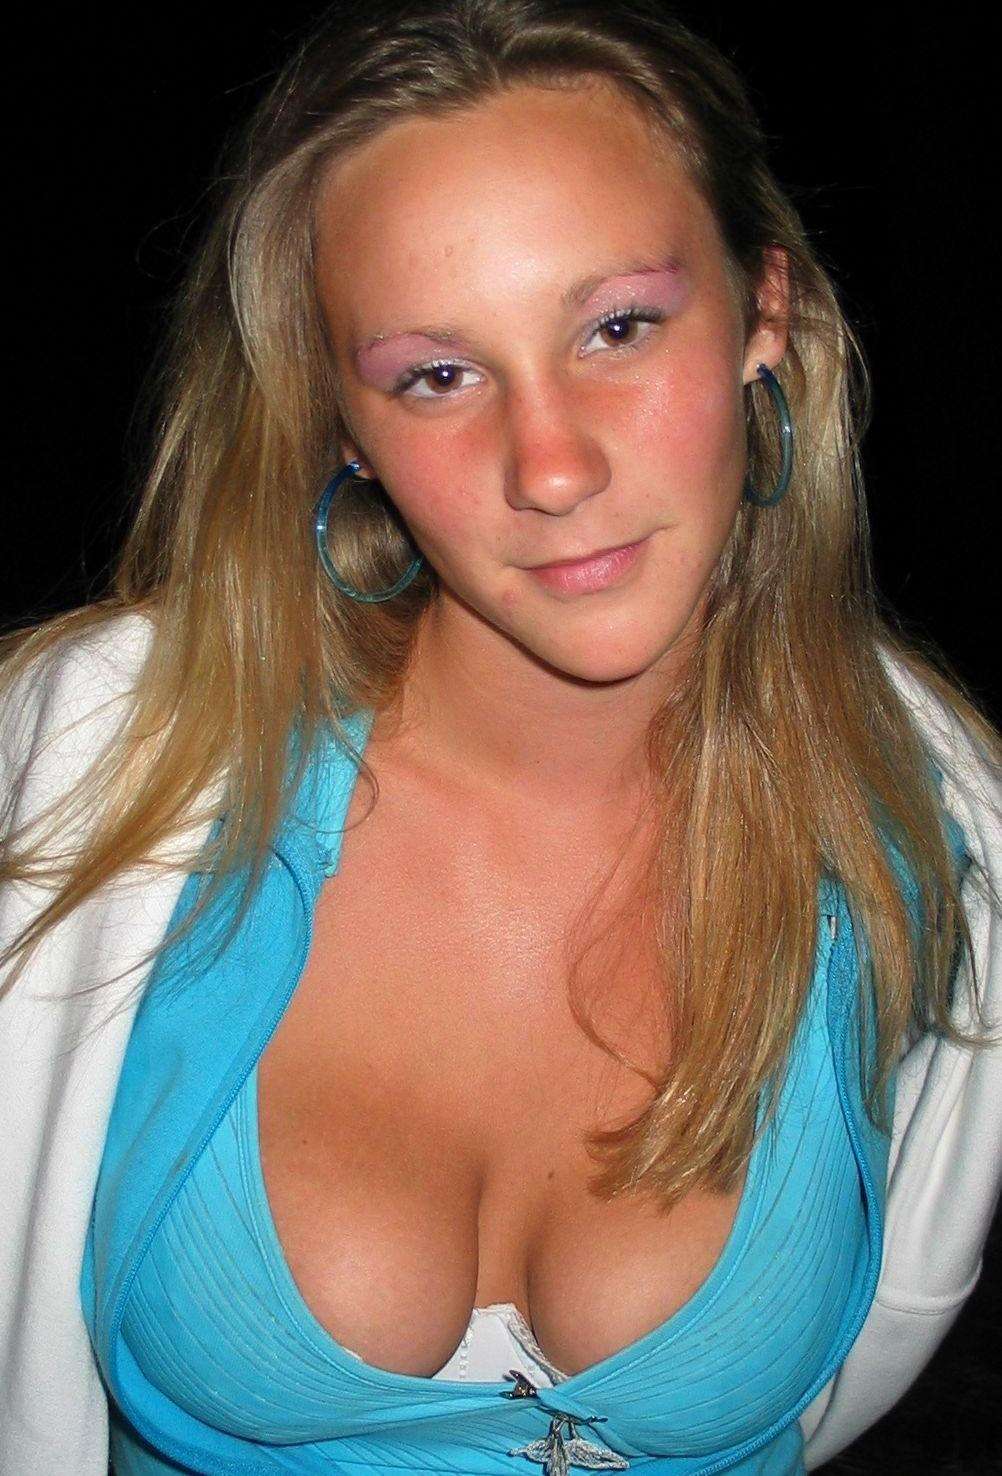 amateur down shirt cleavage gallery